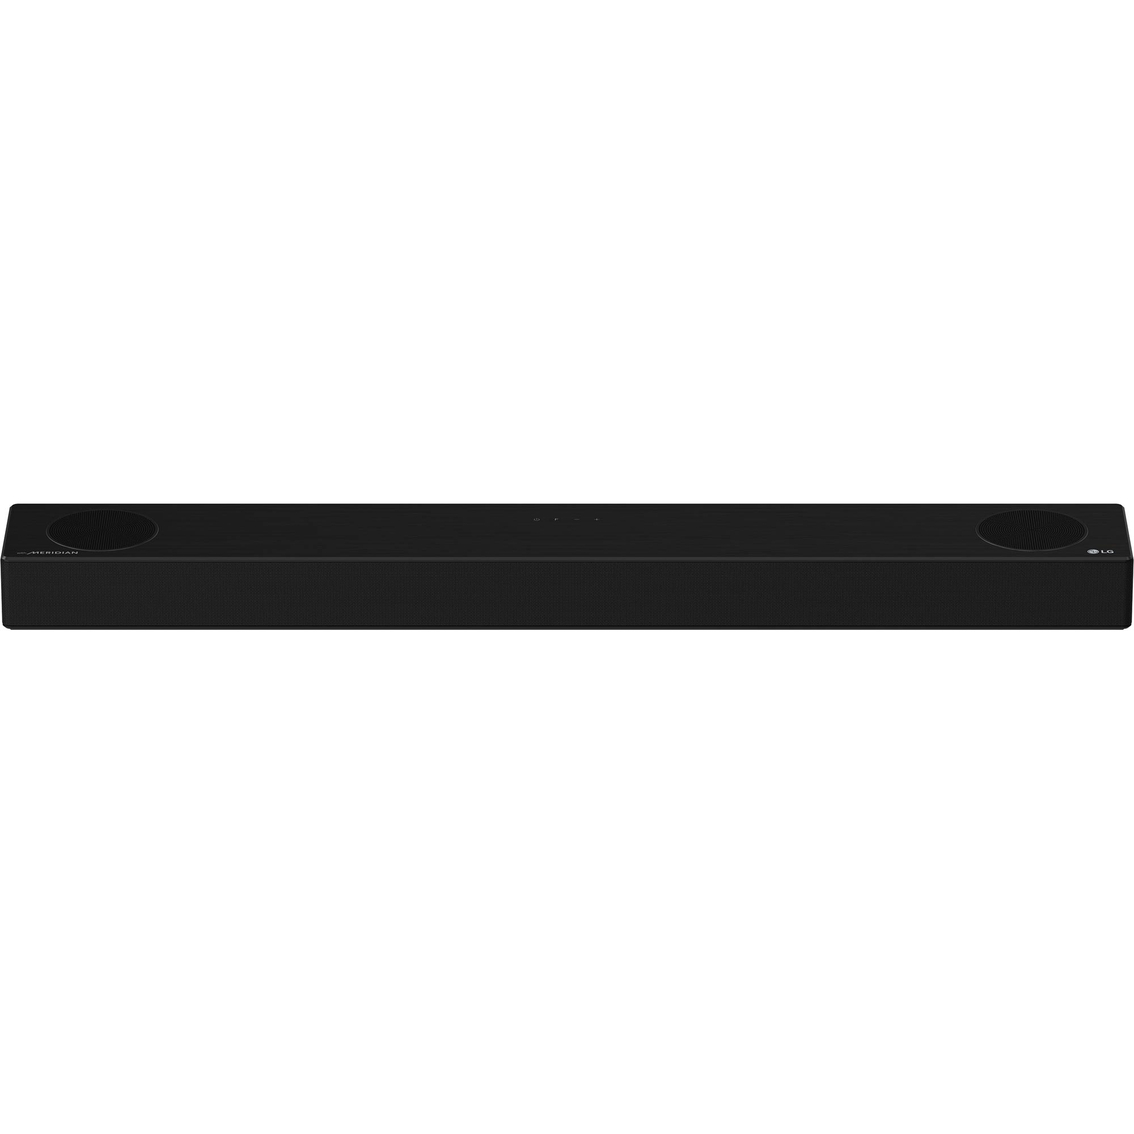 LG SPD7Y  3.1.2 Channel 380W Sound Bar with Dolby Atmos - Image 3 of 10